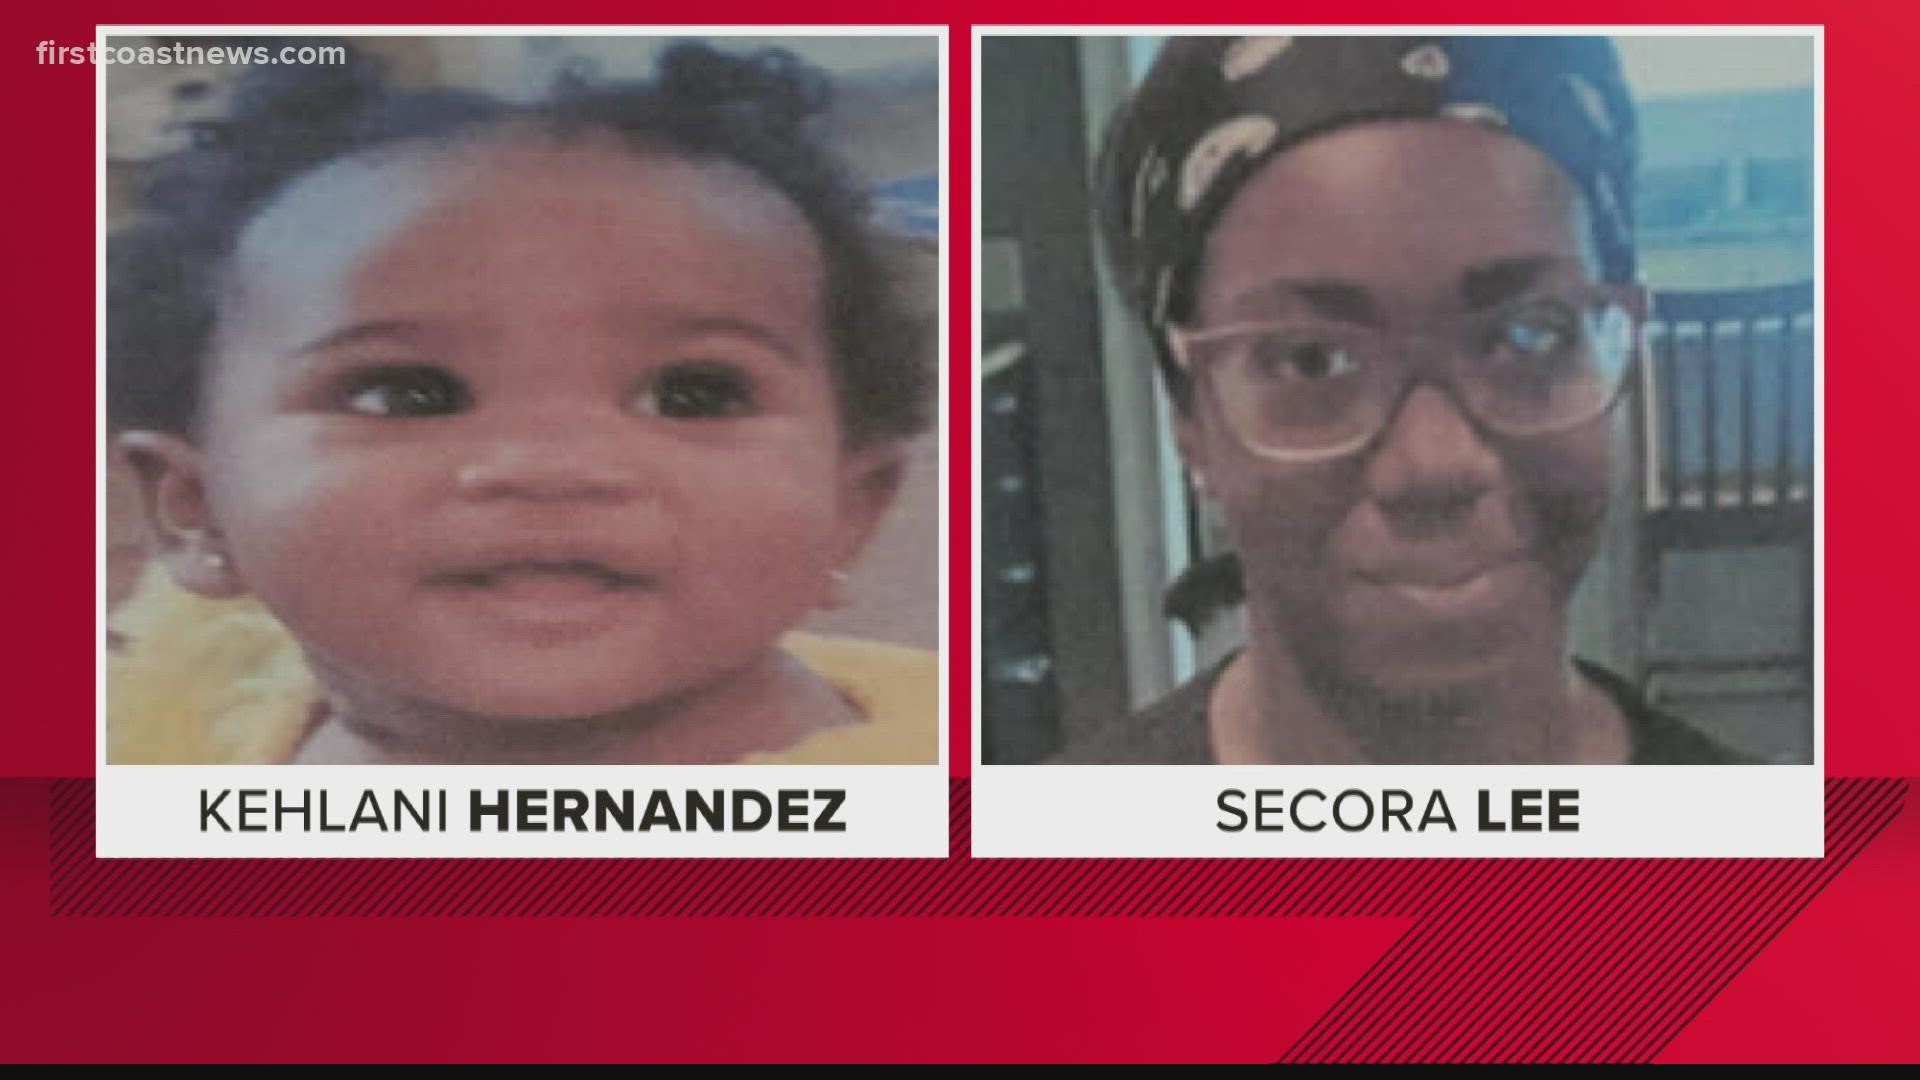 Law enforcement is searching for 16-year-old Secora Lee and 11-month-old Kehlani Hernandez, believed to be in a dark-colored sedan.